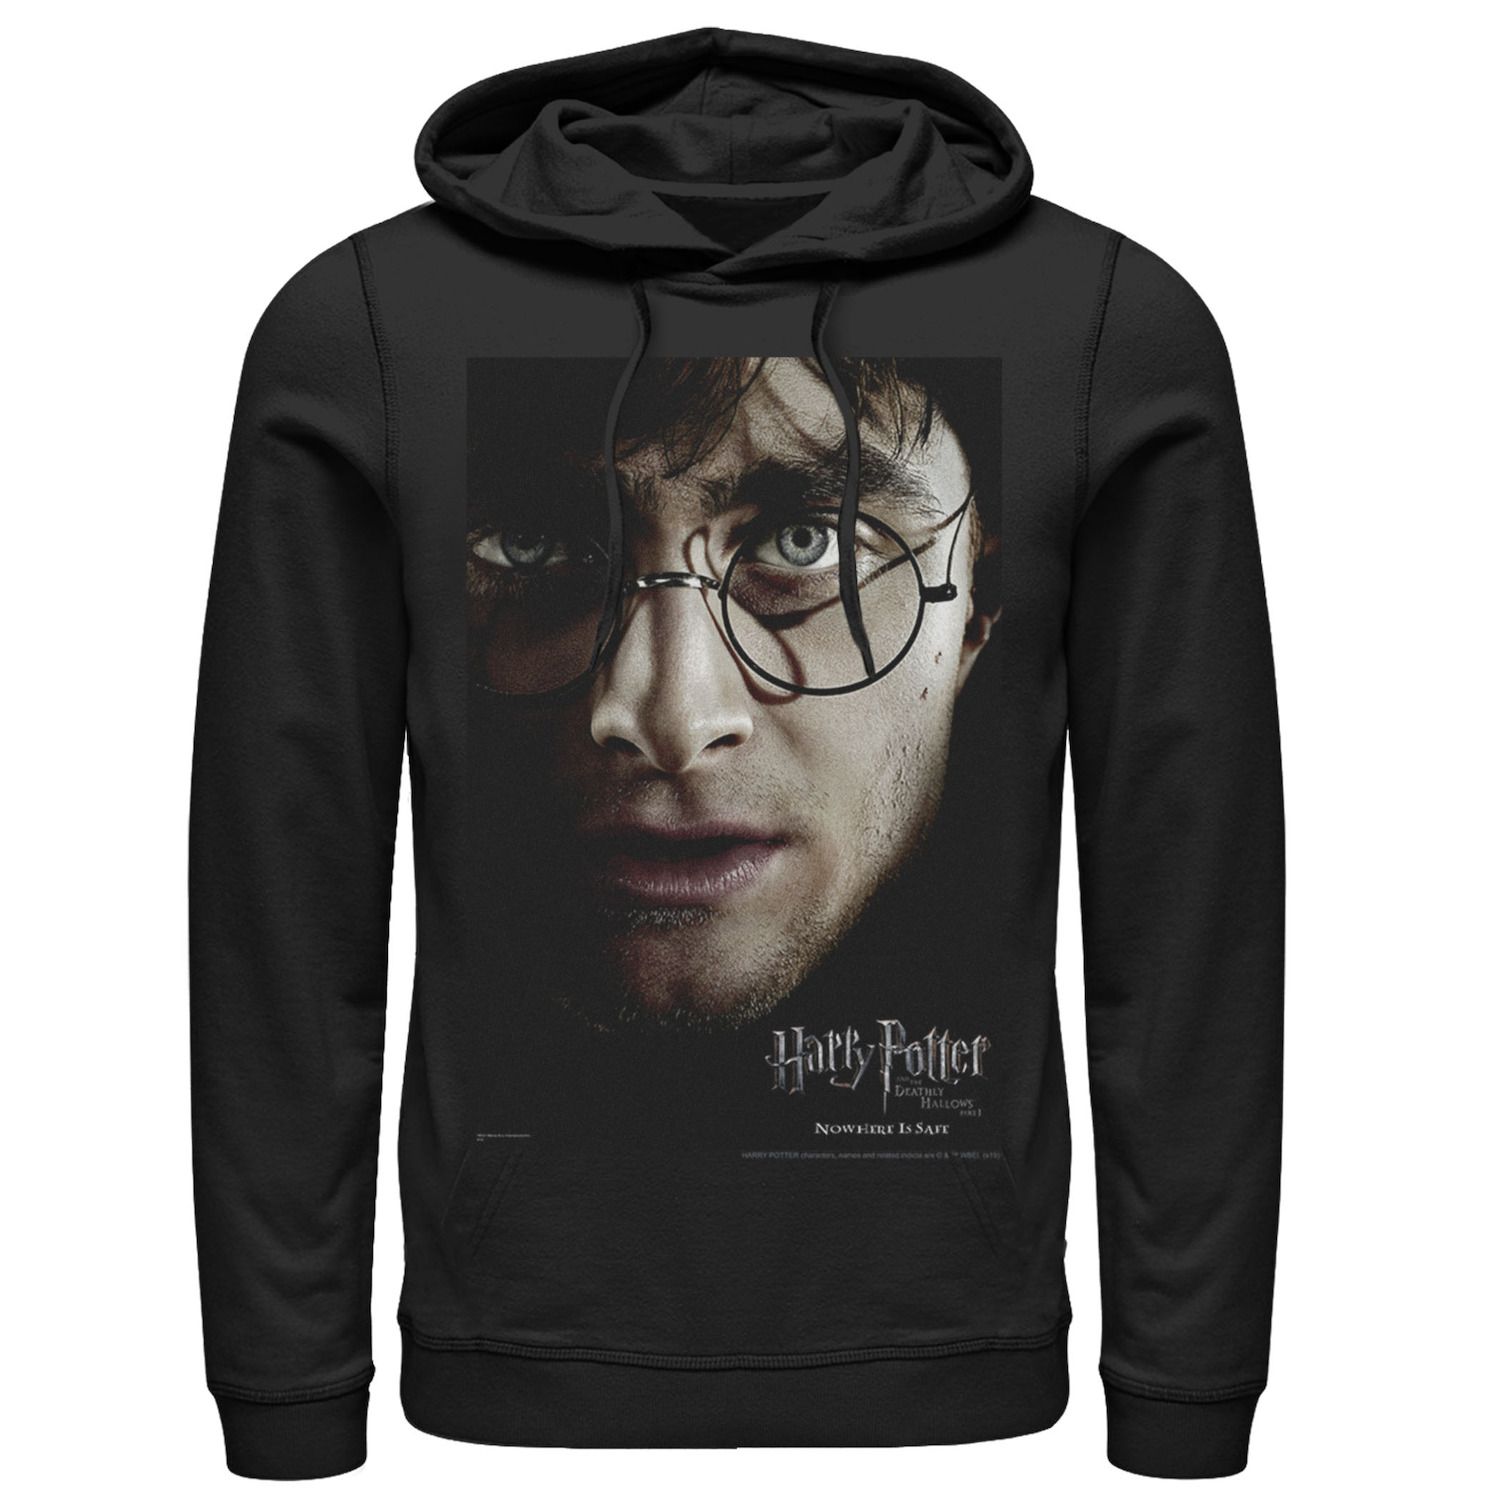 Image for Harry Potter Men's Deathly Hallows Harry Character Poster Graphic Pullover Hoodie at Kohl's.